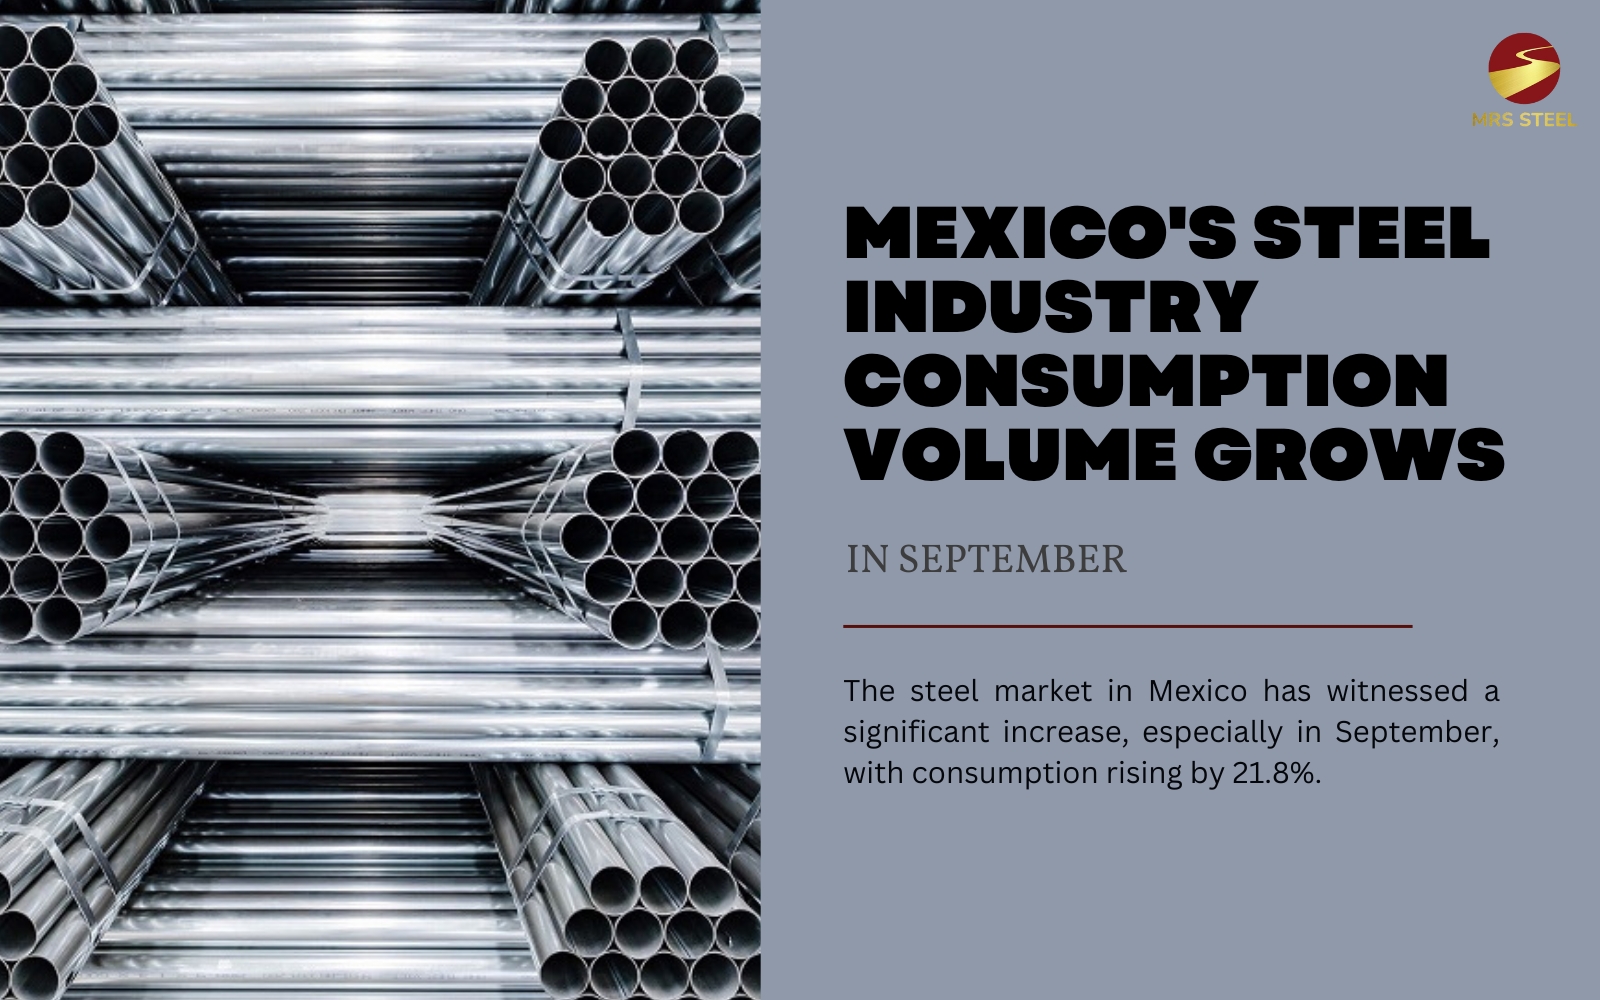 Mexico's Steel Consumption Volume Grows in September